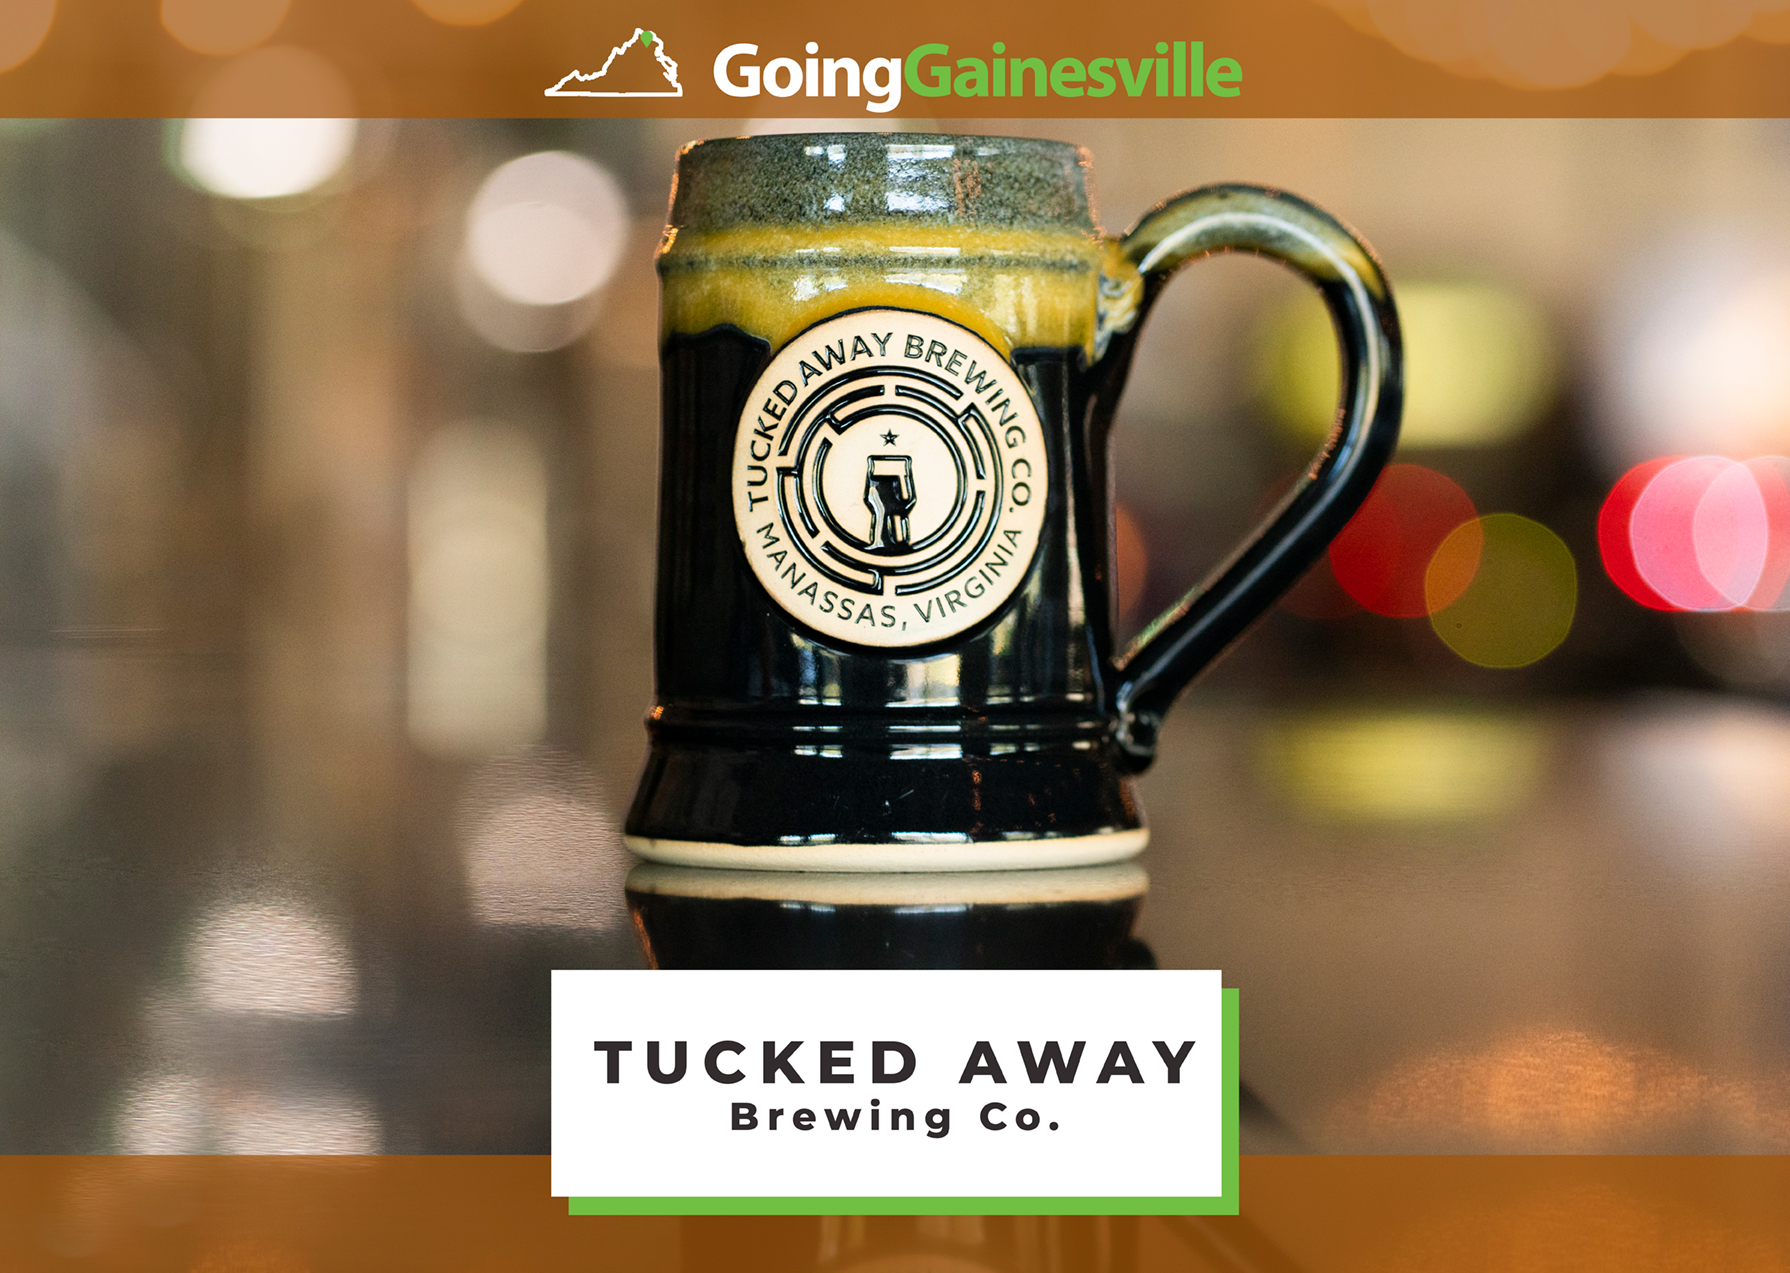 Tucked Away Brewing Co